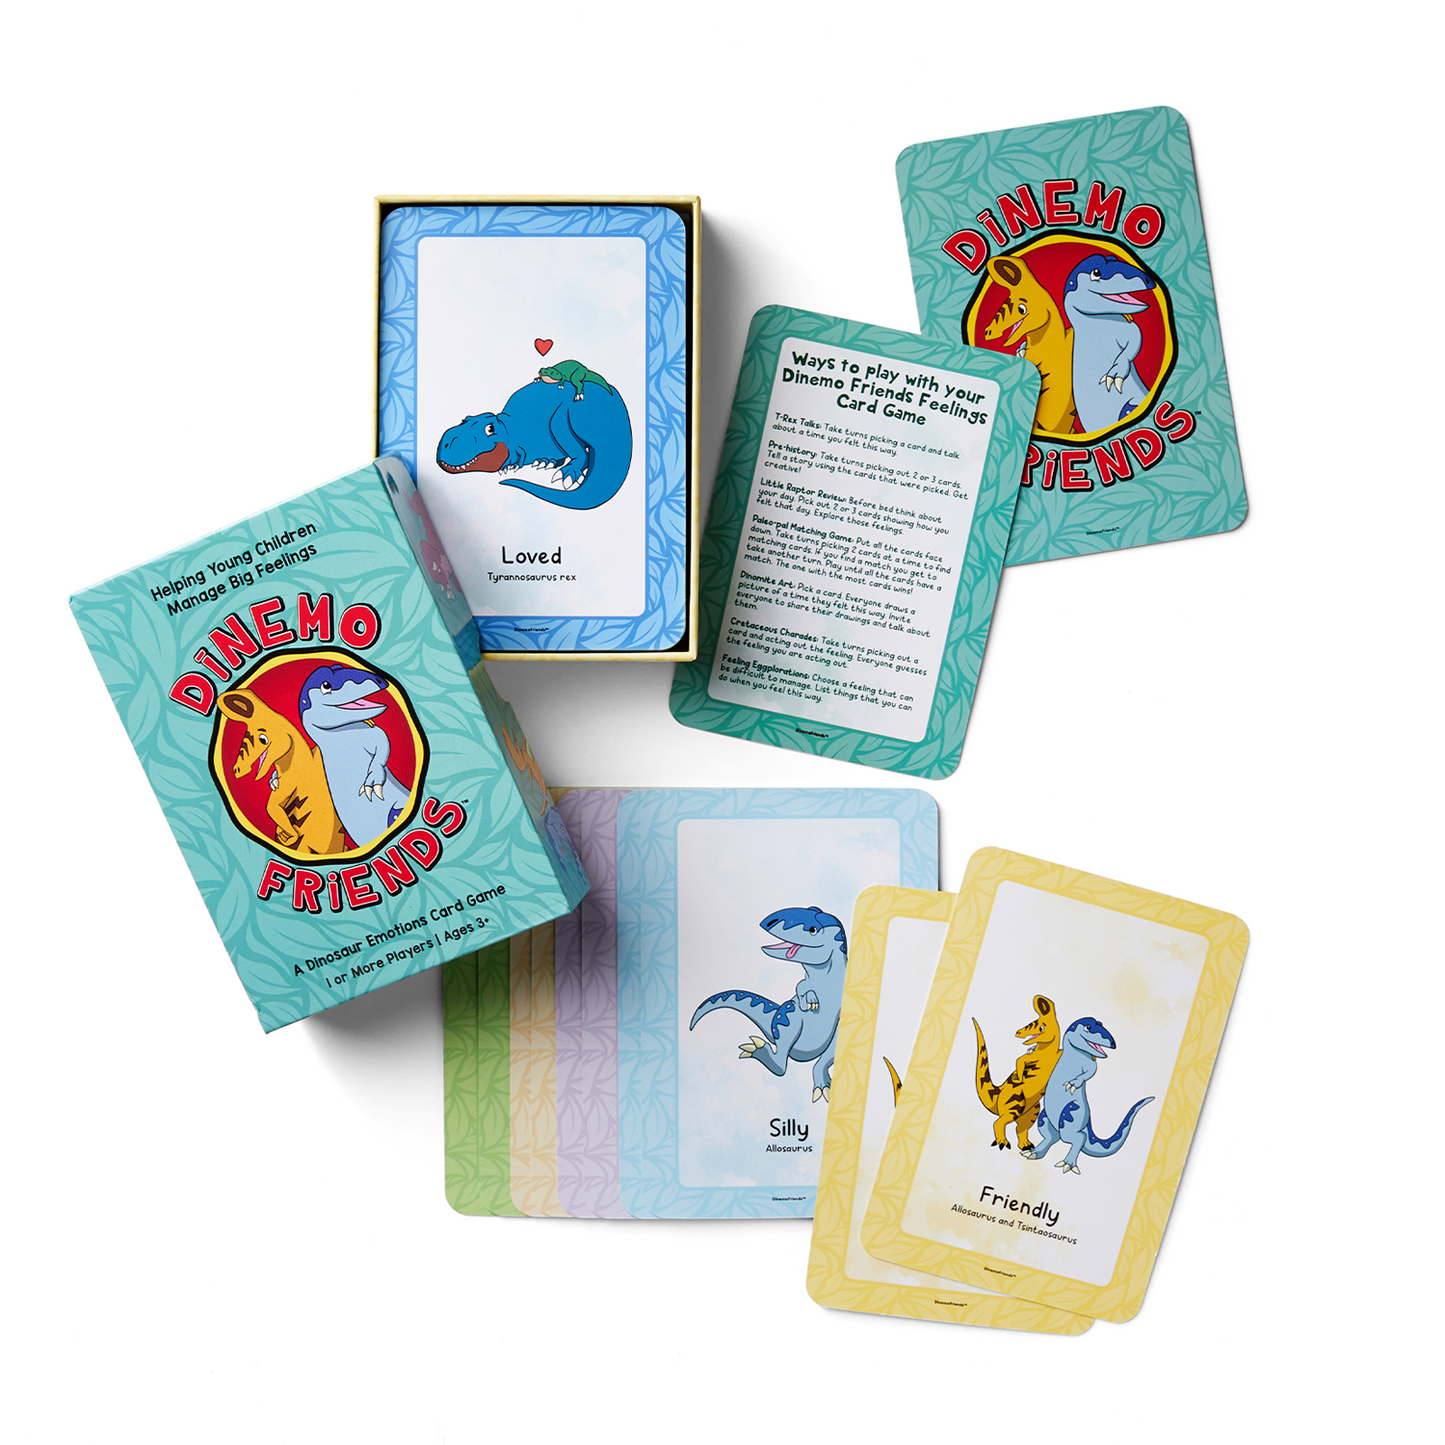 Dinemo Friends: A Dinosaur Emotions Card Game